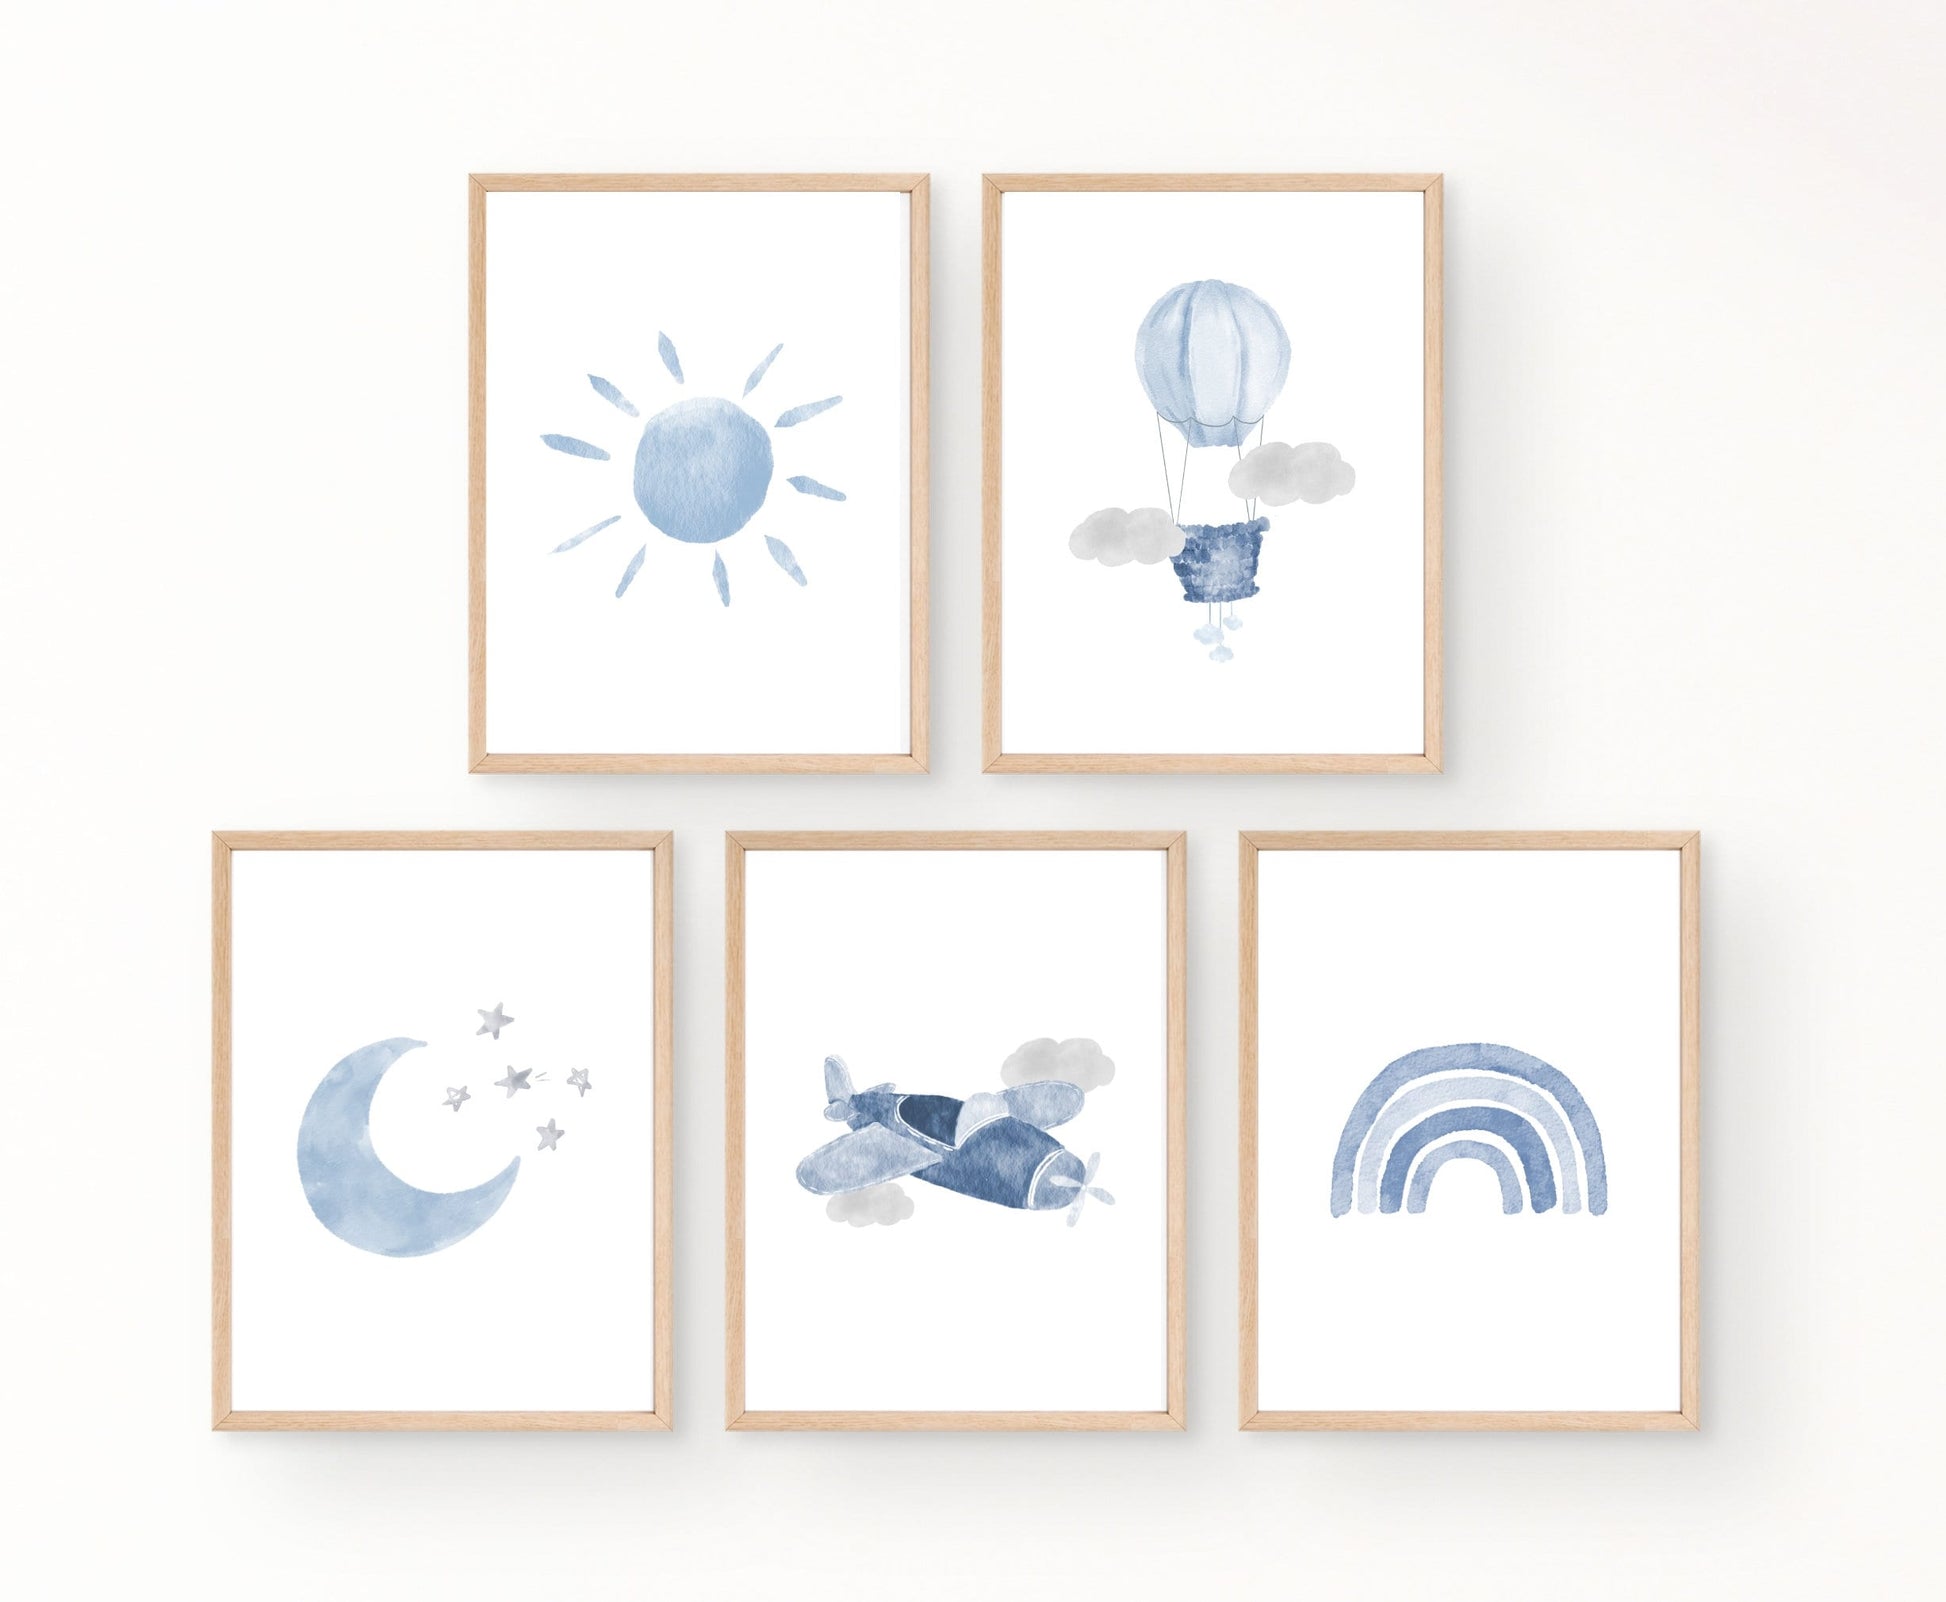 An image showing five graphics for a little boy’s room. The first one shows a baby blue sun, while the second one shows a blue air balloon with two grey clouds. The third one shows a baby blue crescent and some tiny gray stars beside it. The fourth one shows a blue airplane and two gray clouds. The last image shows a baby blue rainbow design.